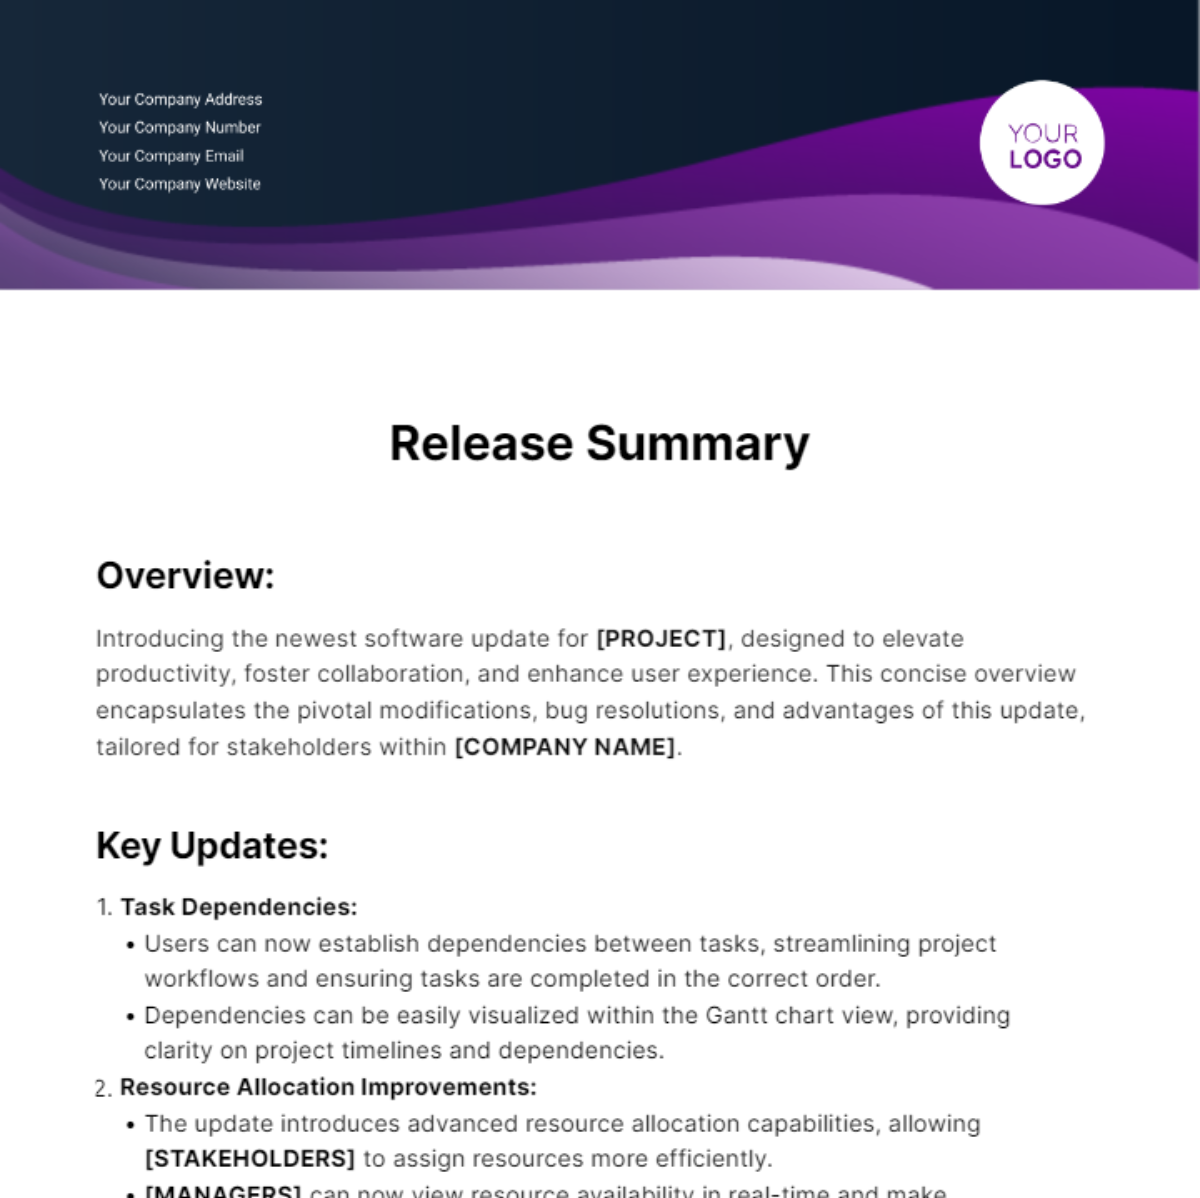 Release Summary Template